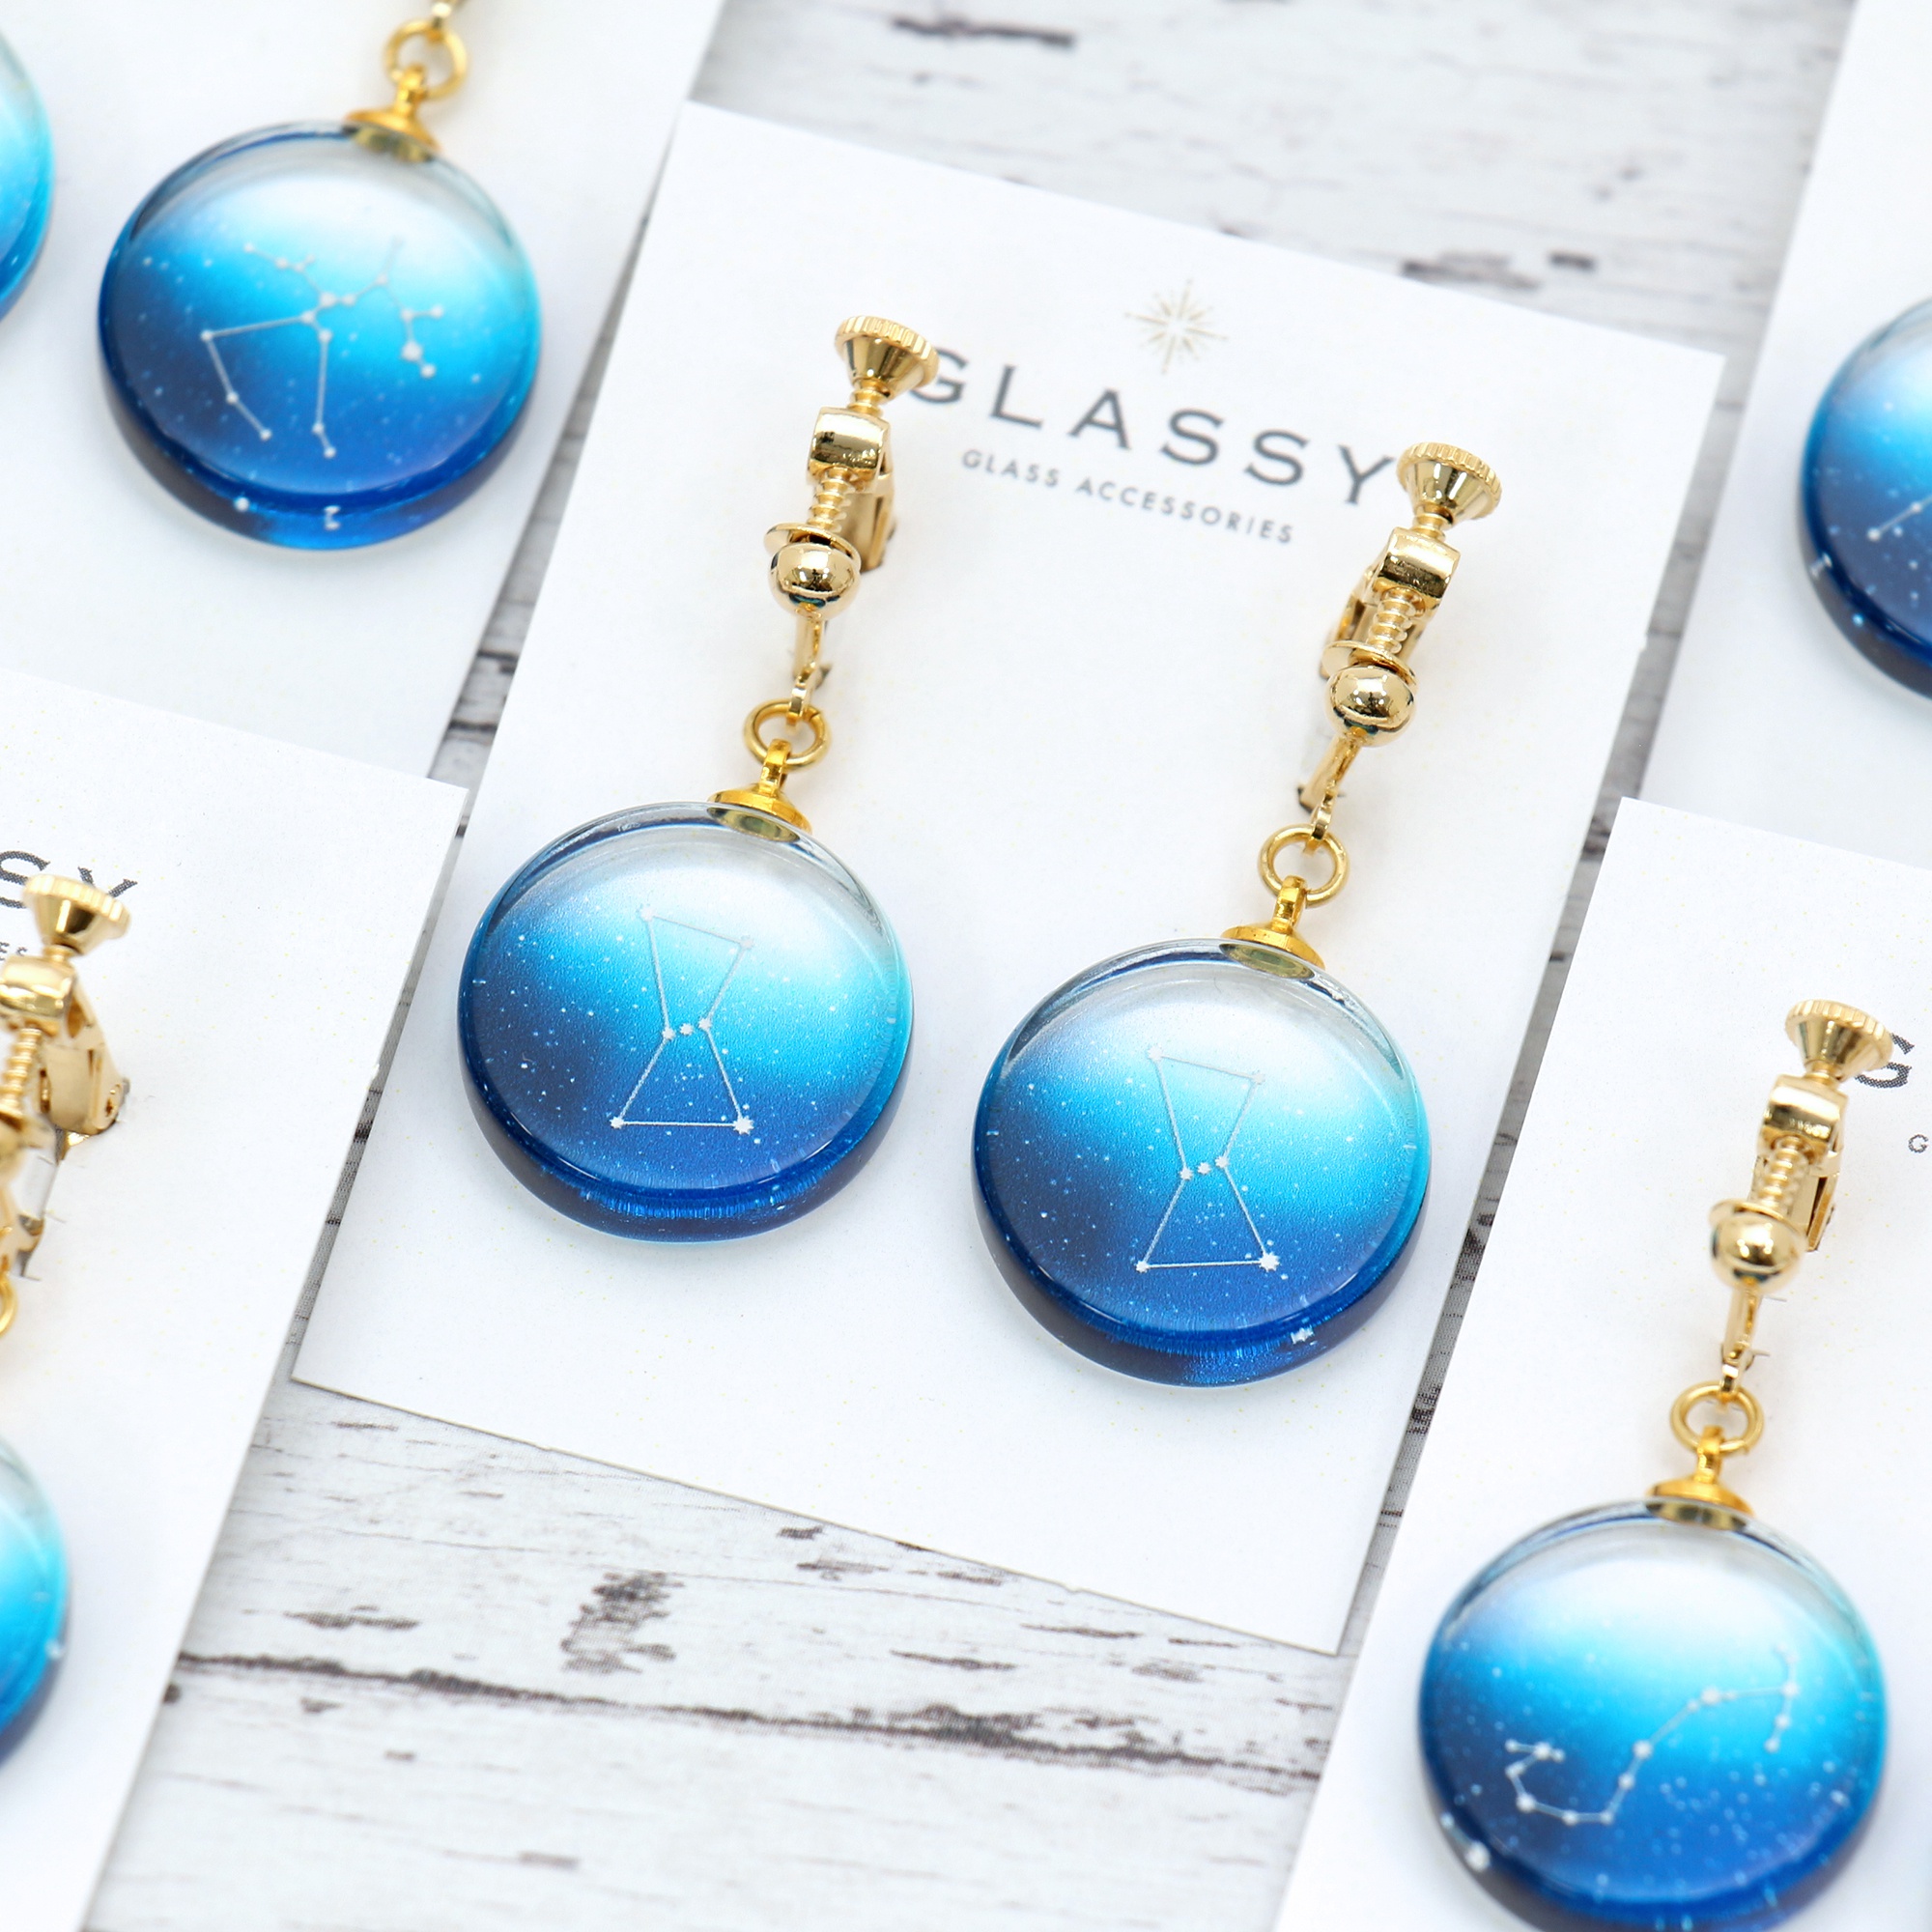 Glass accessories Earring CONSTELLATION Capricorn round shape